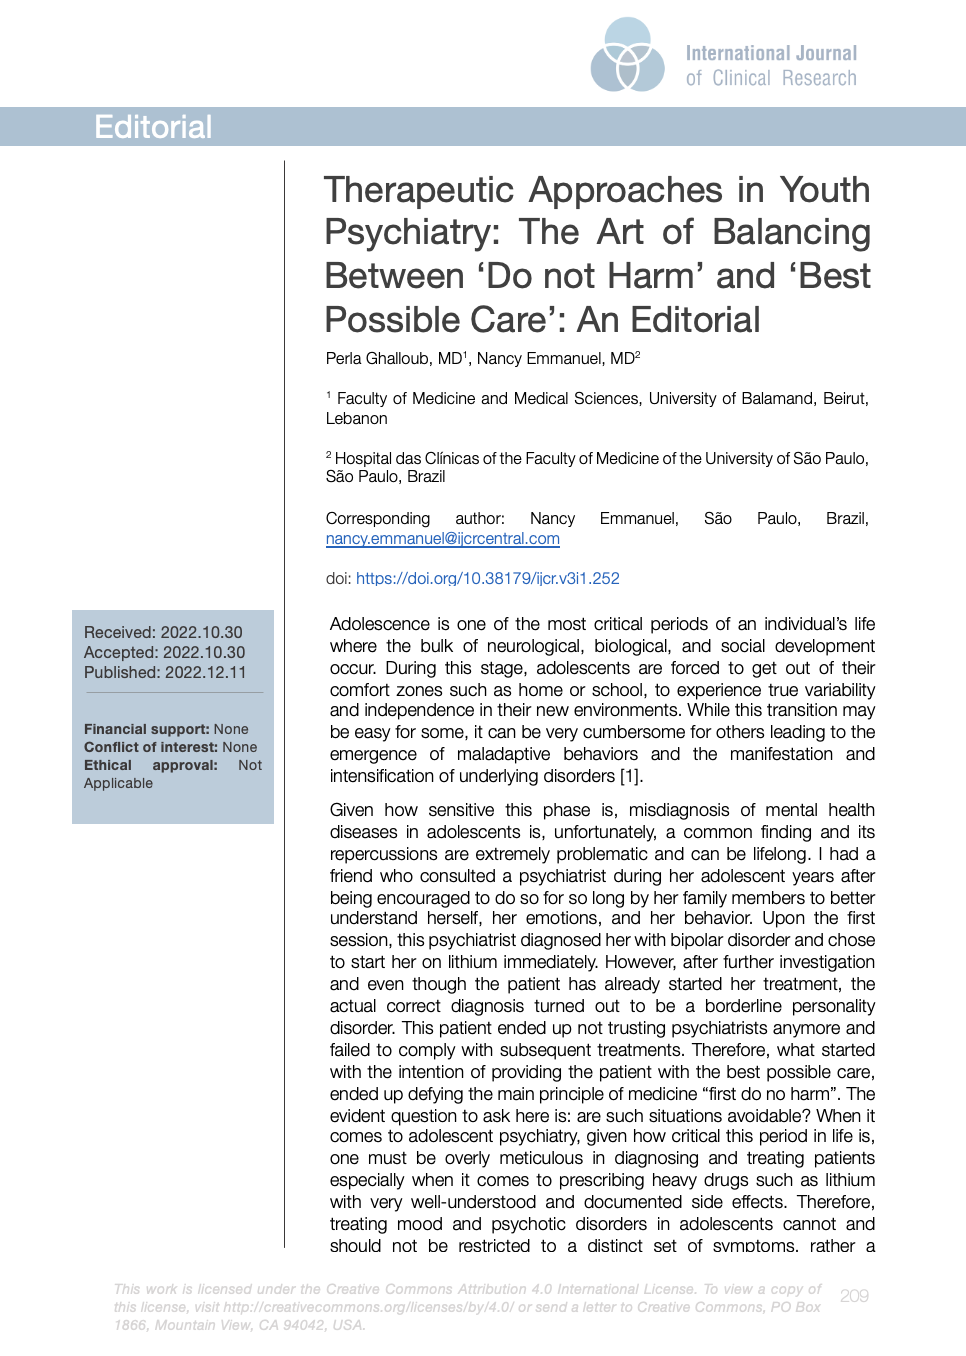 Therapeutic Approaches in Youth Psychiatry: The Art of Balancing Between ‘Do not Harm’ and ‘Best Possible Care’: An Editorial